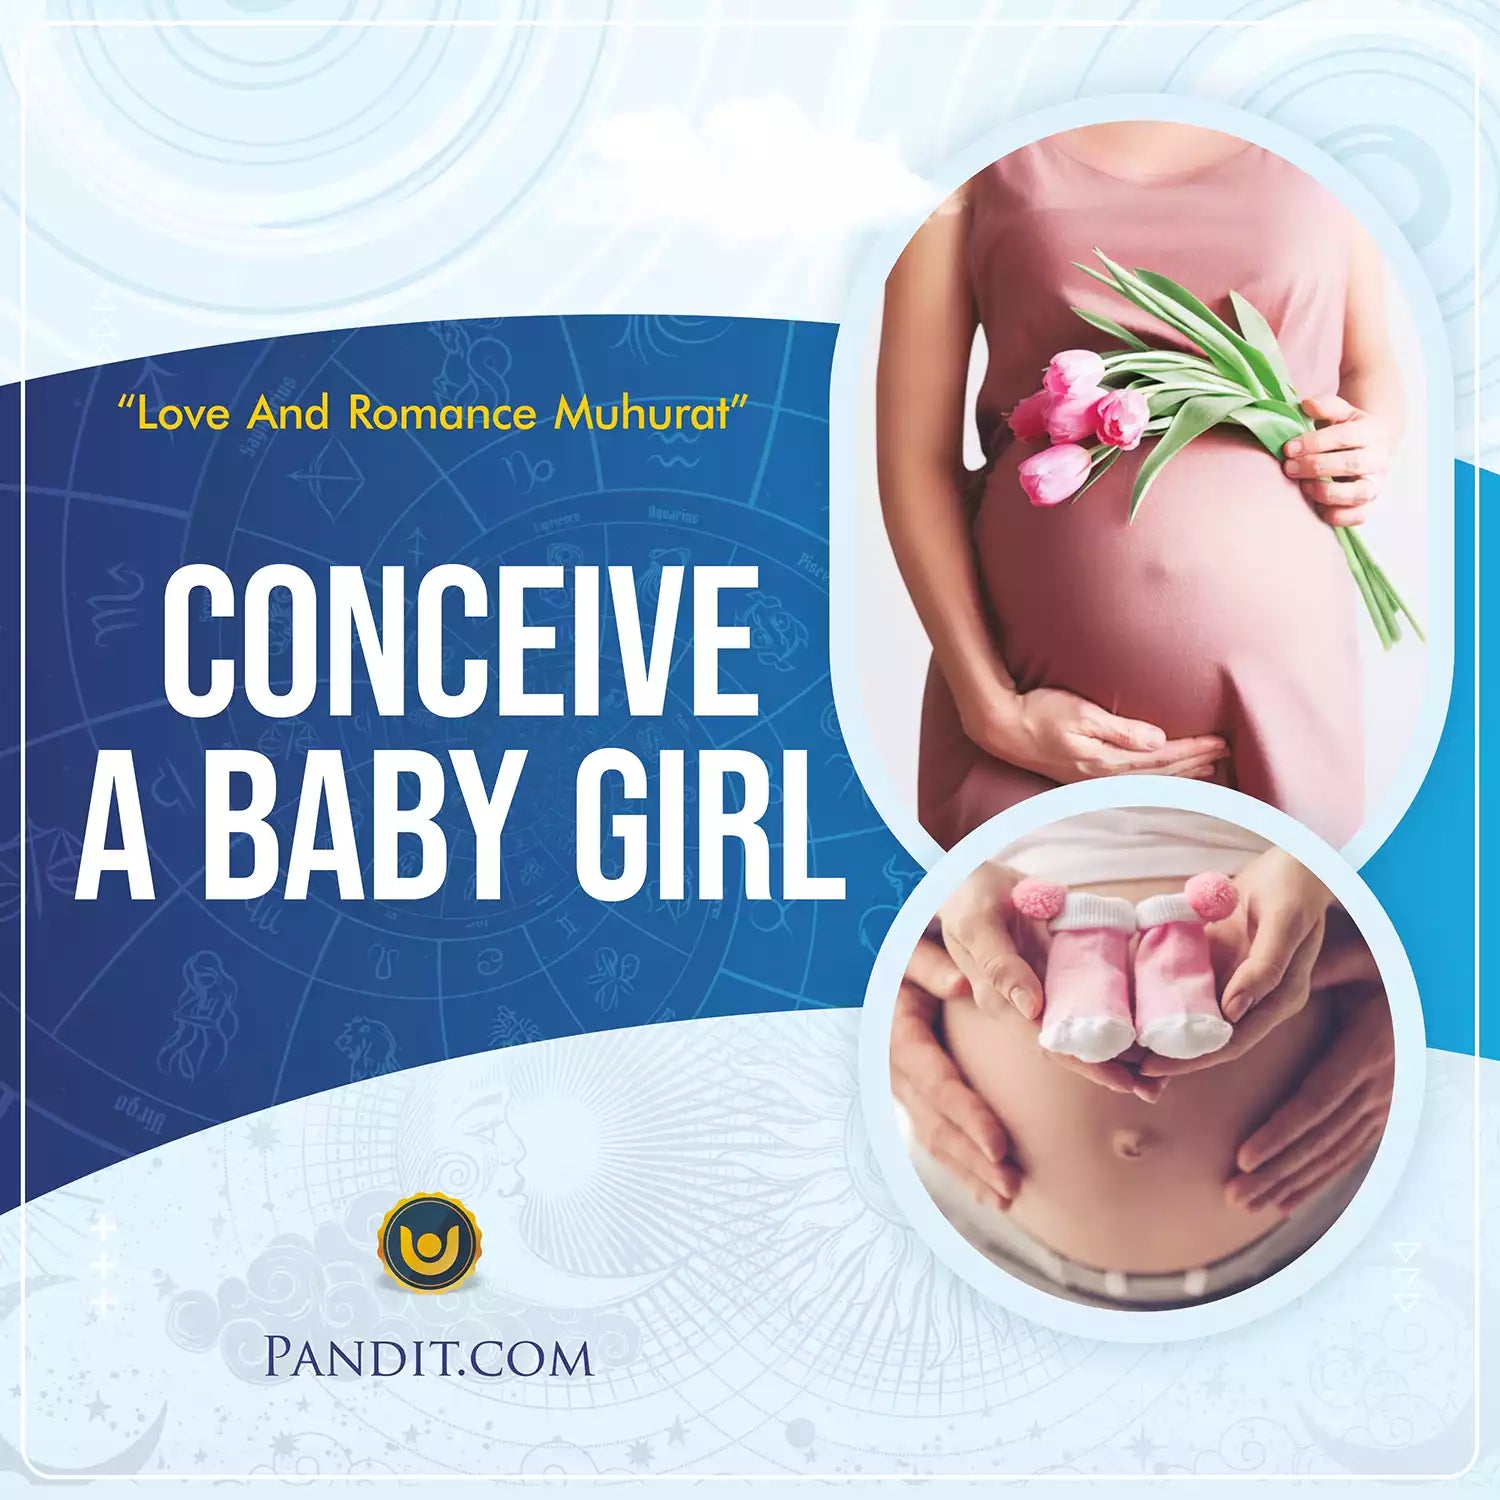 Conceive a Baby Girl